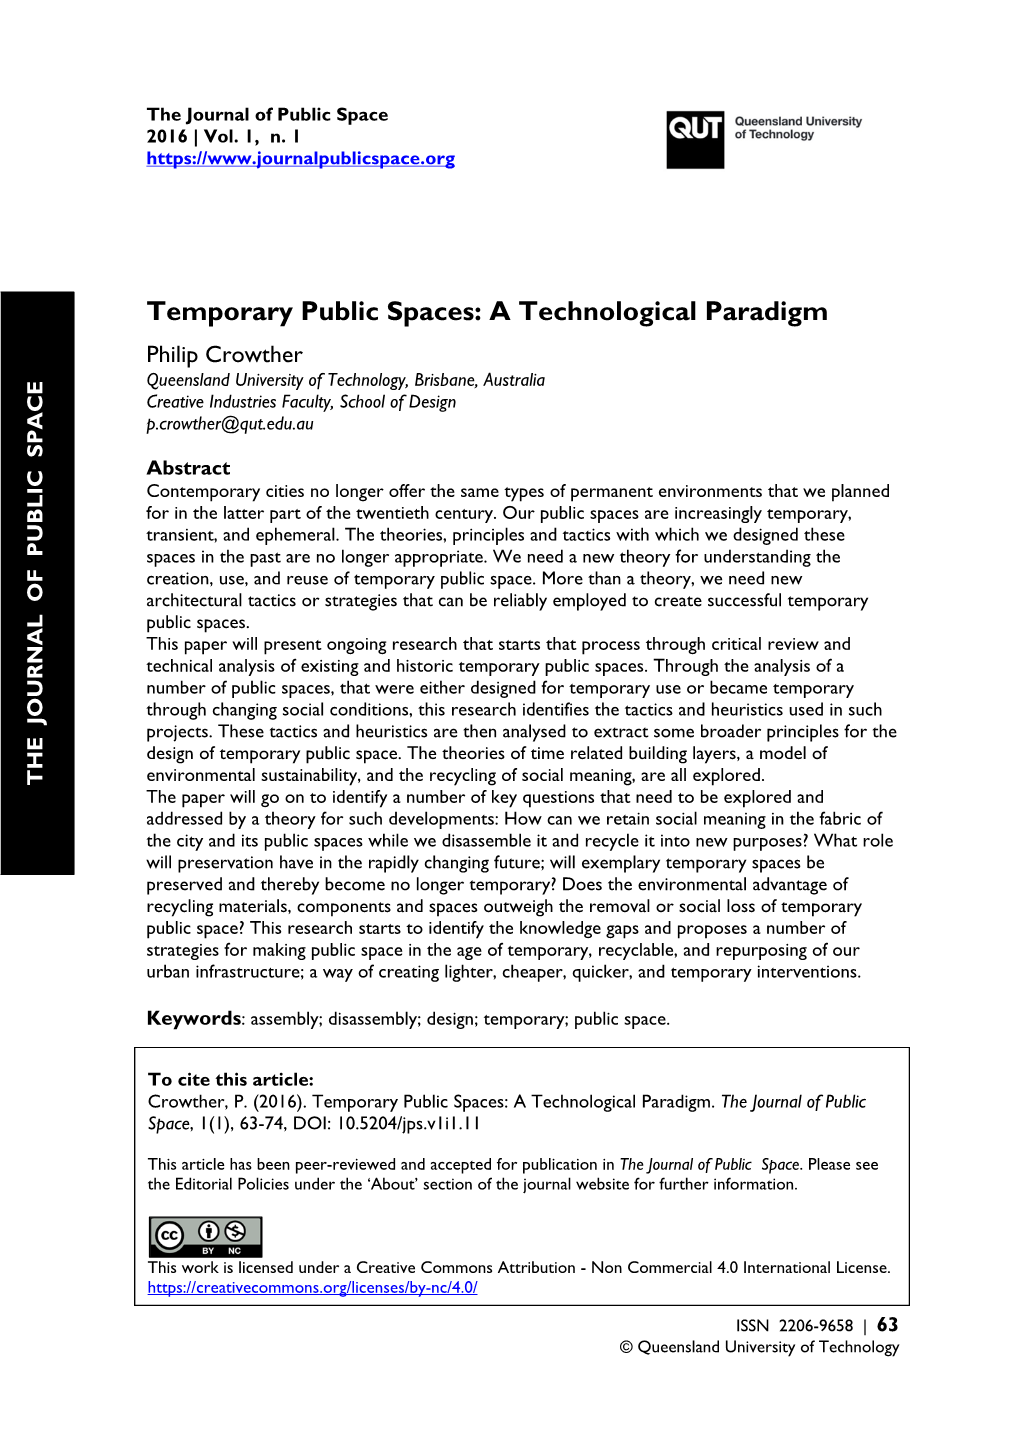 Temporary Public Spaces: a Technological Paradigm